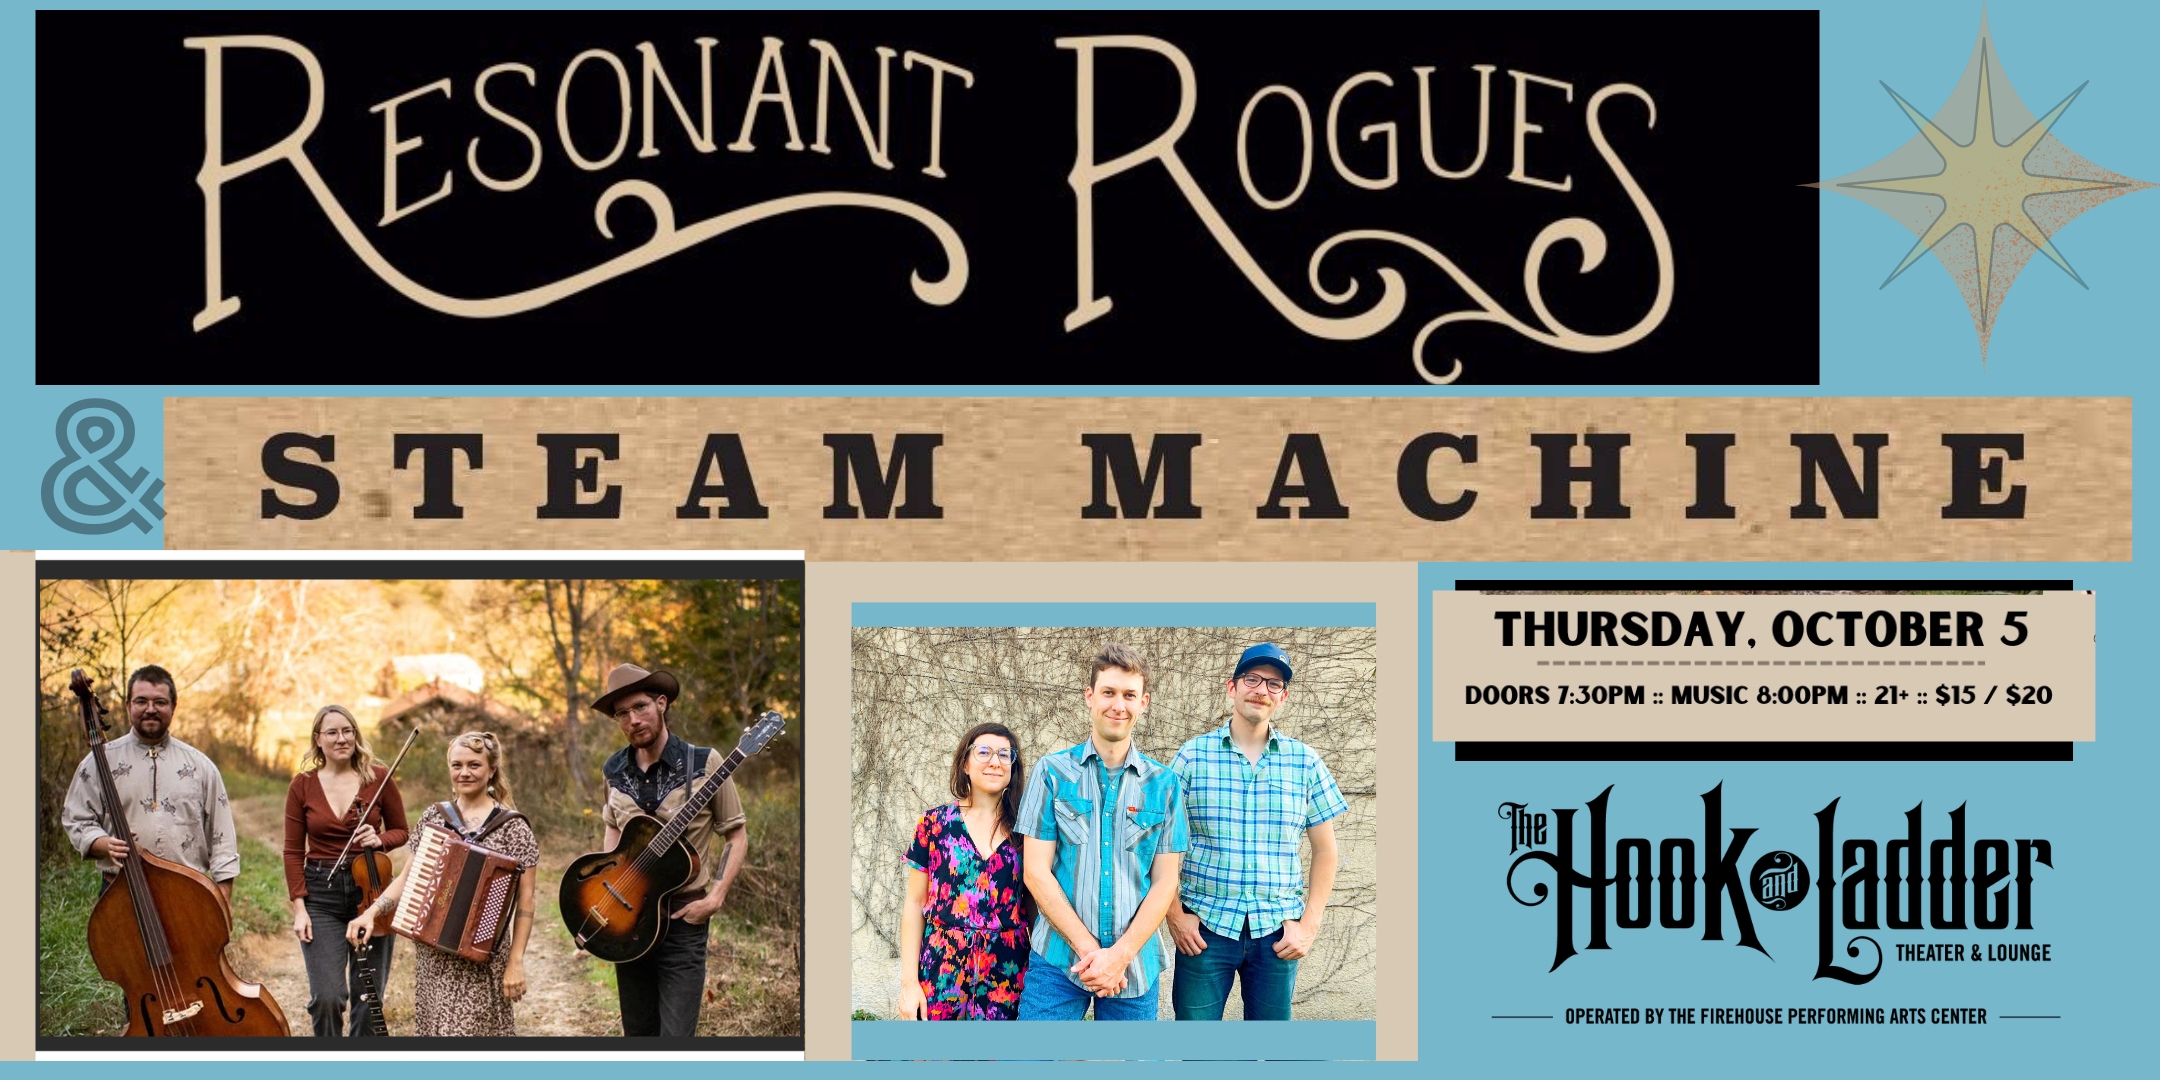 The Resonant Rouges & Steam Machine Thursday, October 5 The Hook and Ladder Theater Doors 7:30pm :: Music 8:00pm :: 21+ GA $15 ADV / $20 DOS